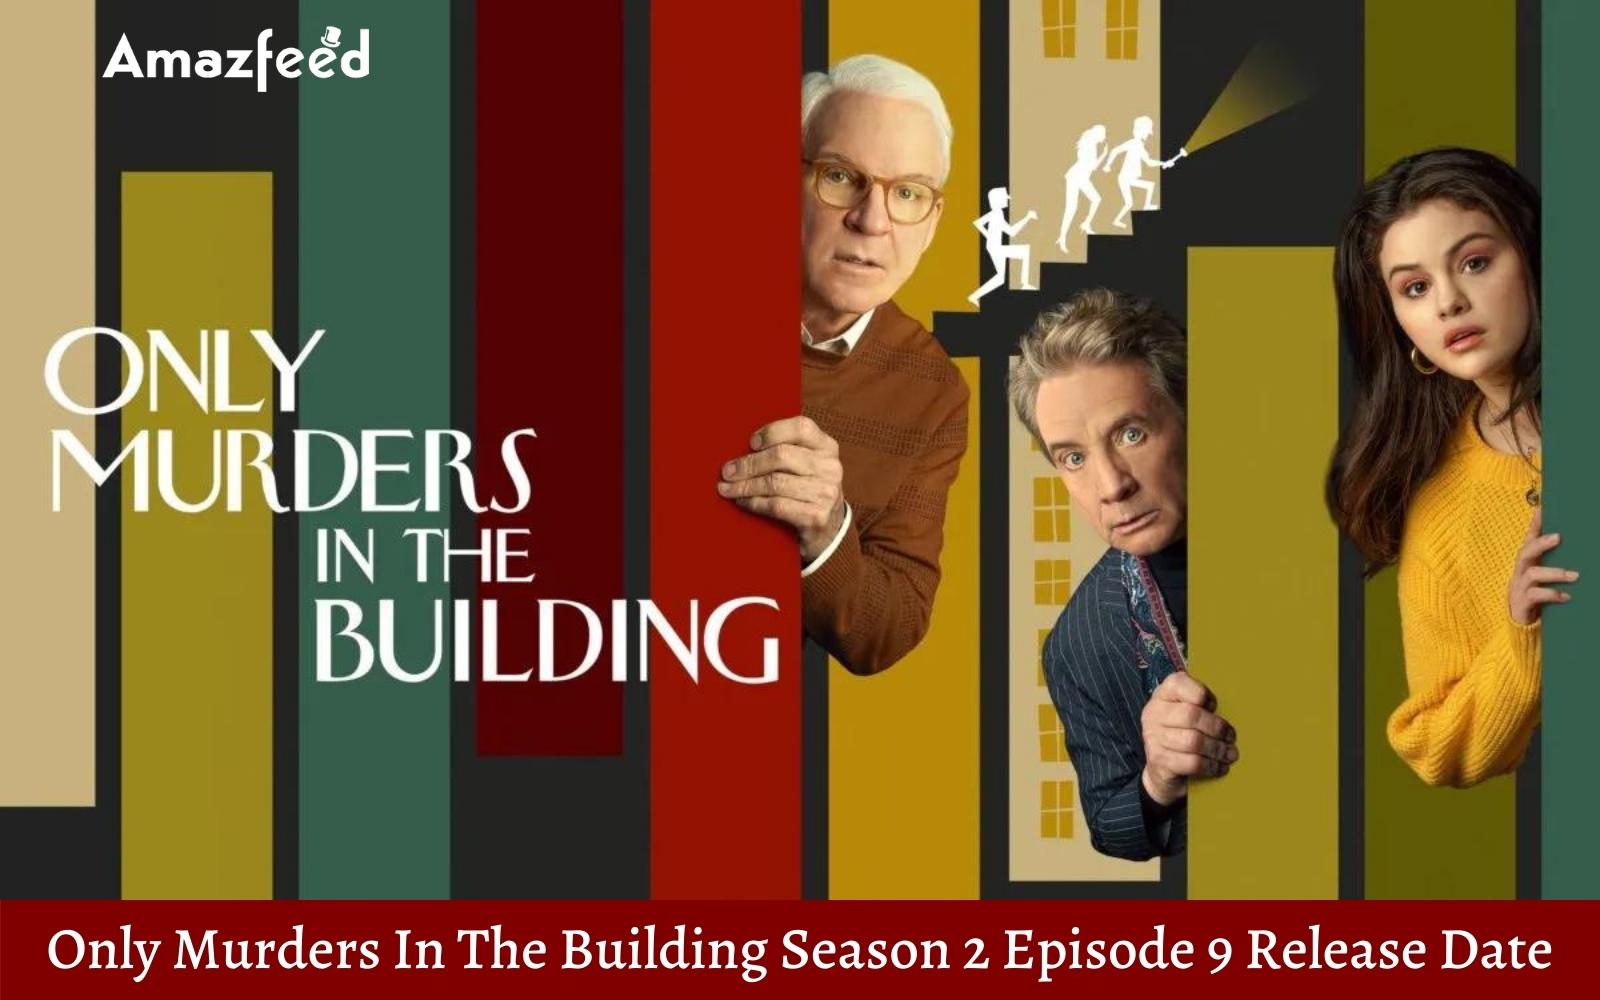 Only Murders In The Building Season 2 Episode 9 ⇒ Countdown, Release Date, Spoilers, Recap, Cast & Where to Watch